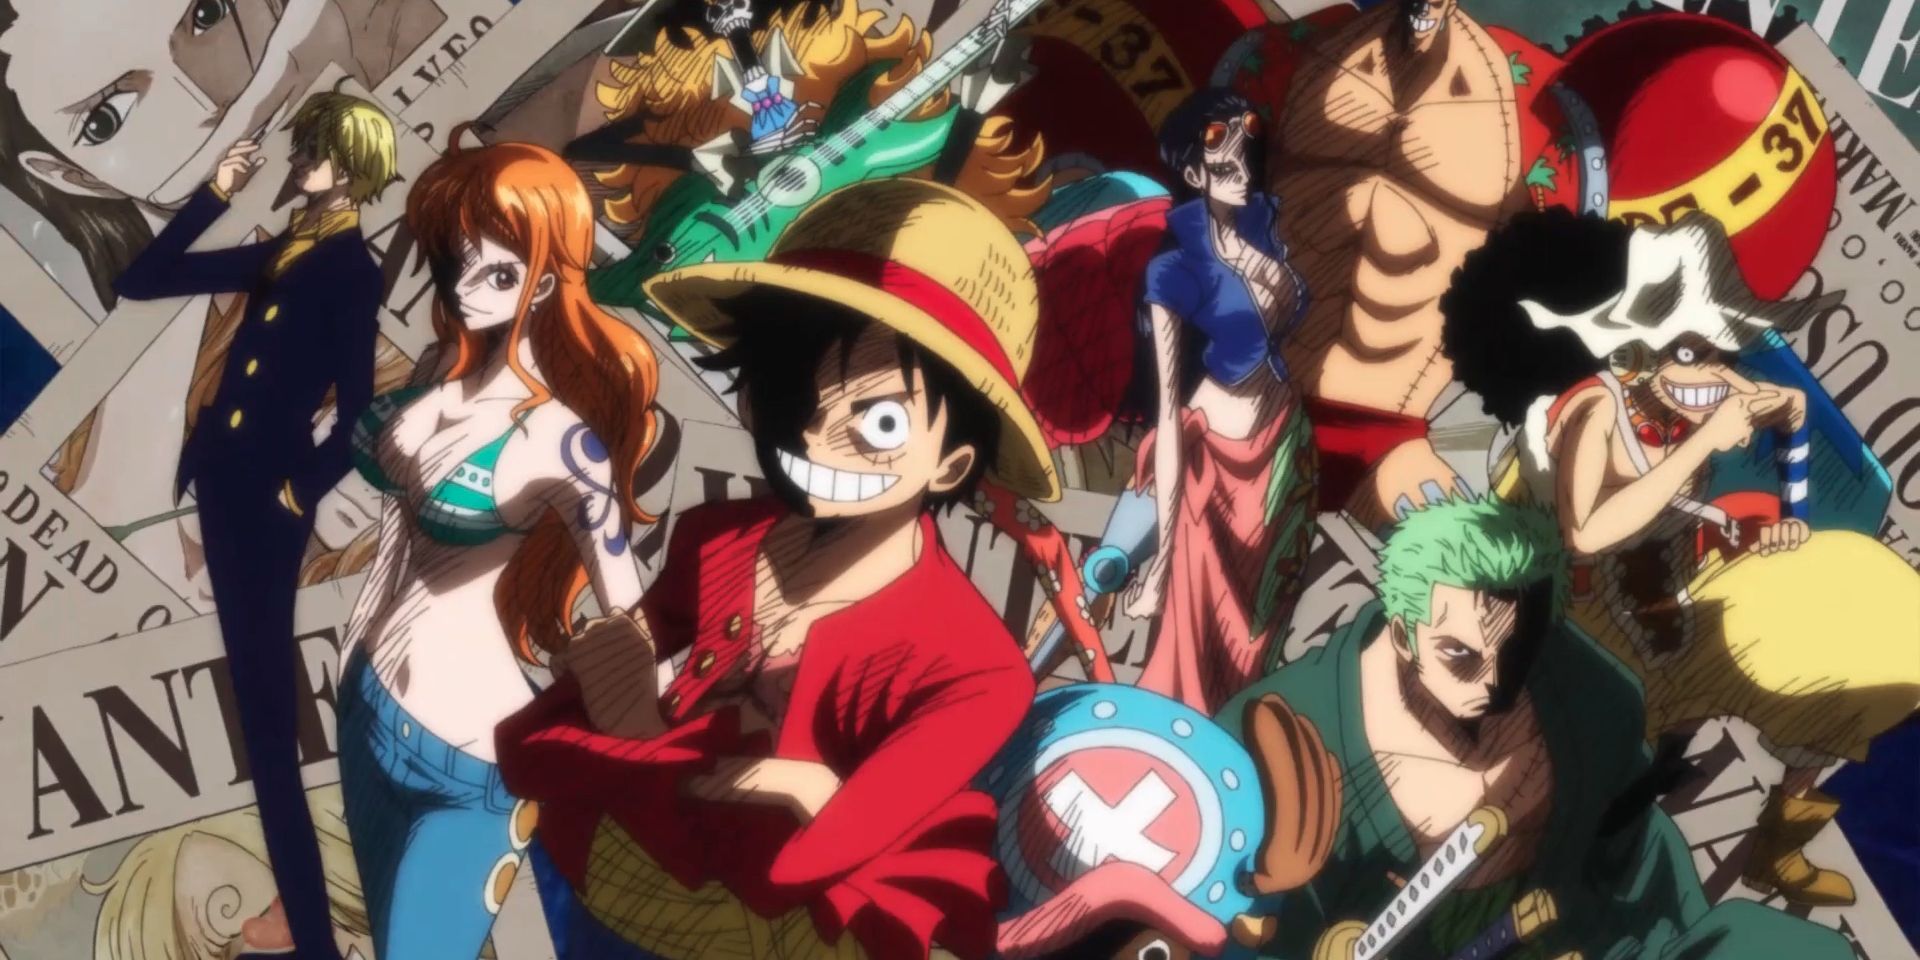 One Piece's Luffy and the Straw Hat Pirates' stand in front of a background of Wanted Posters